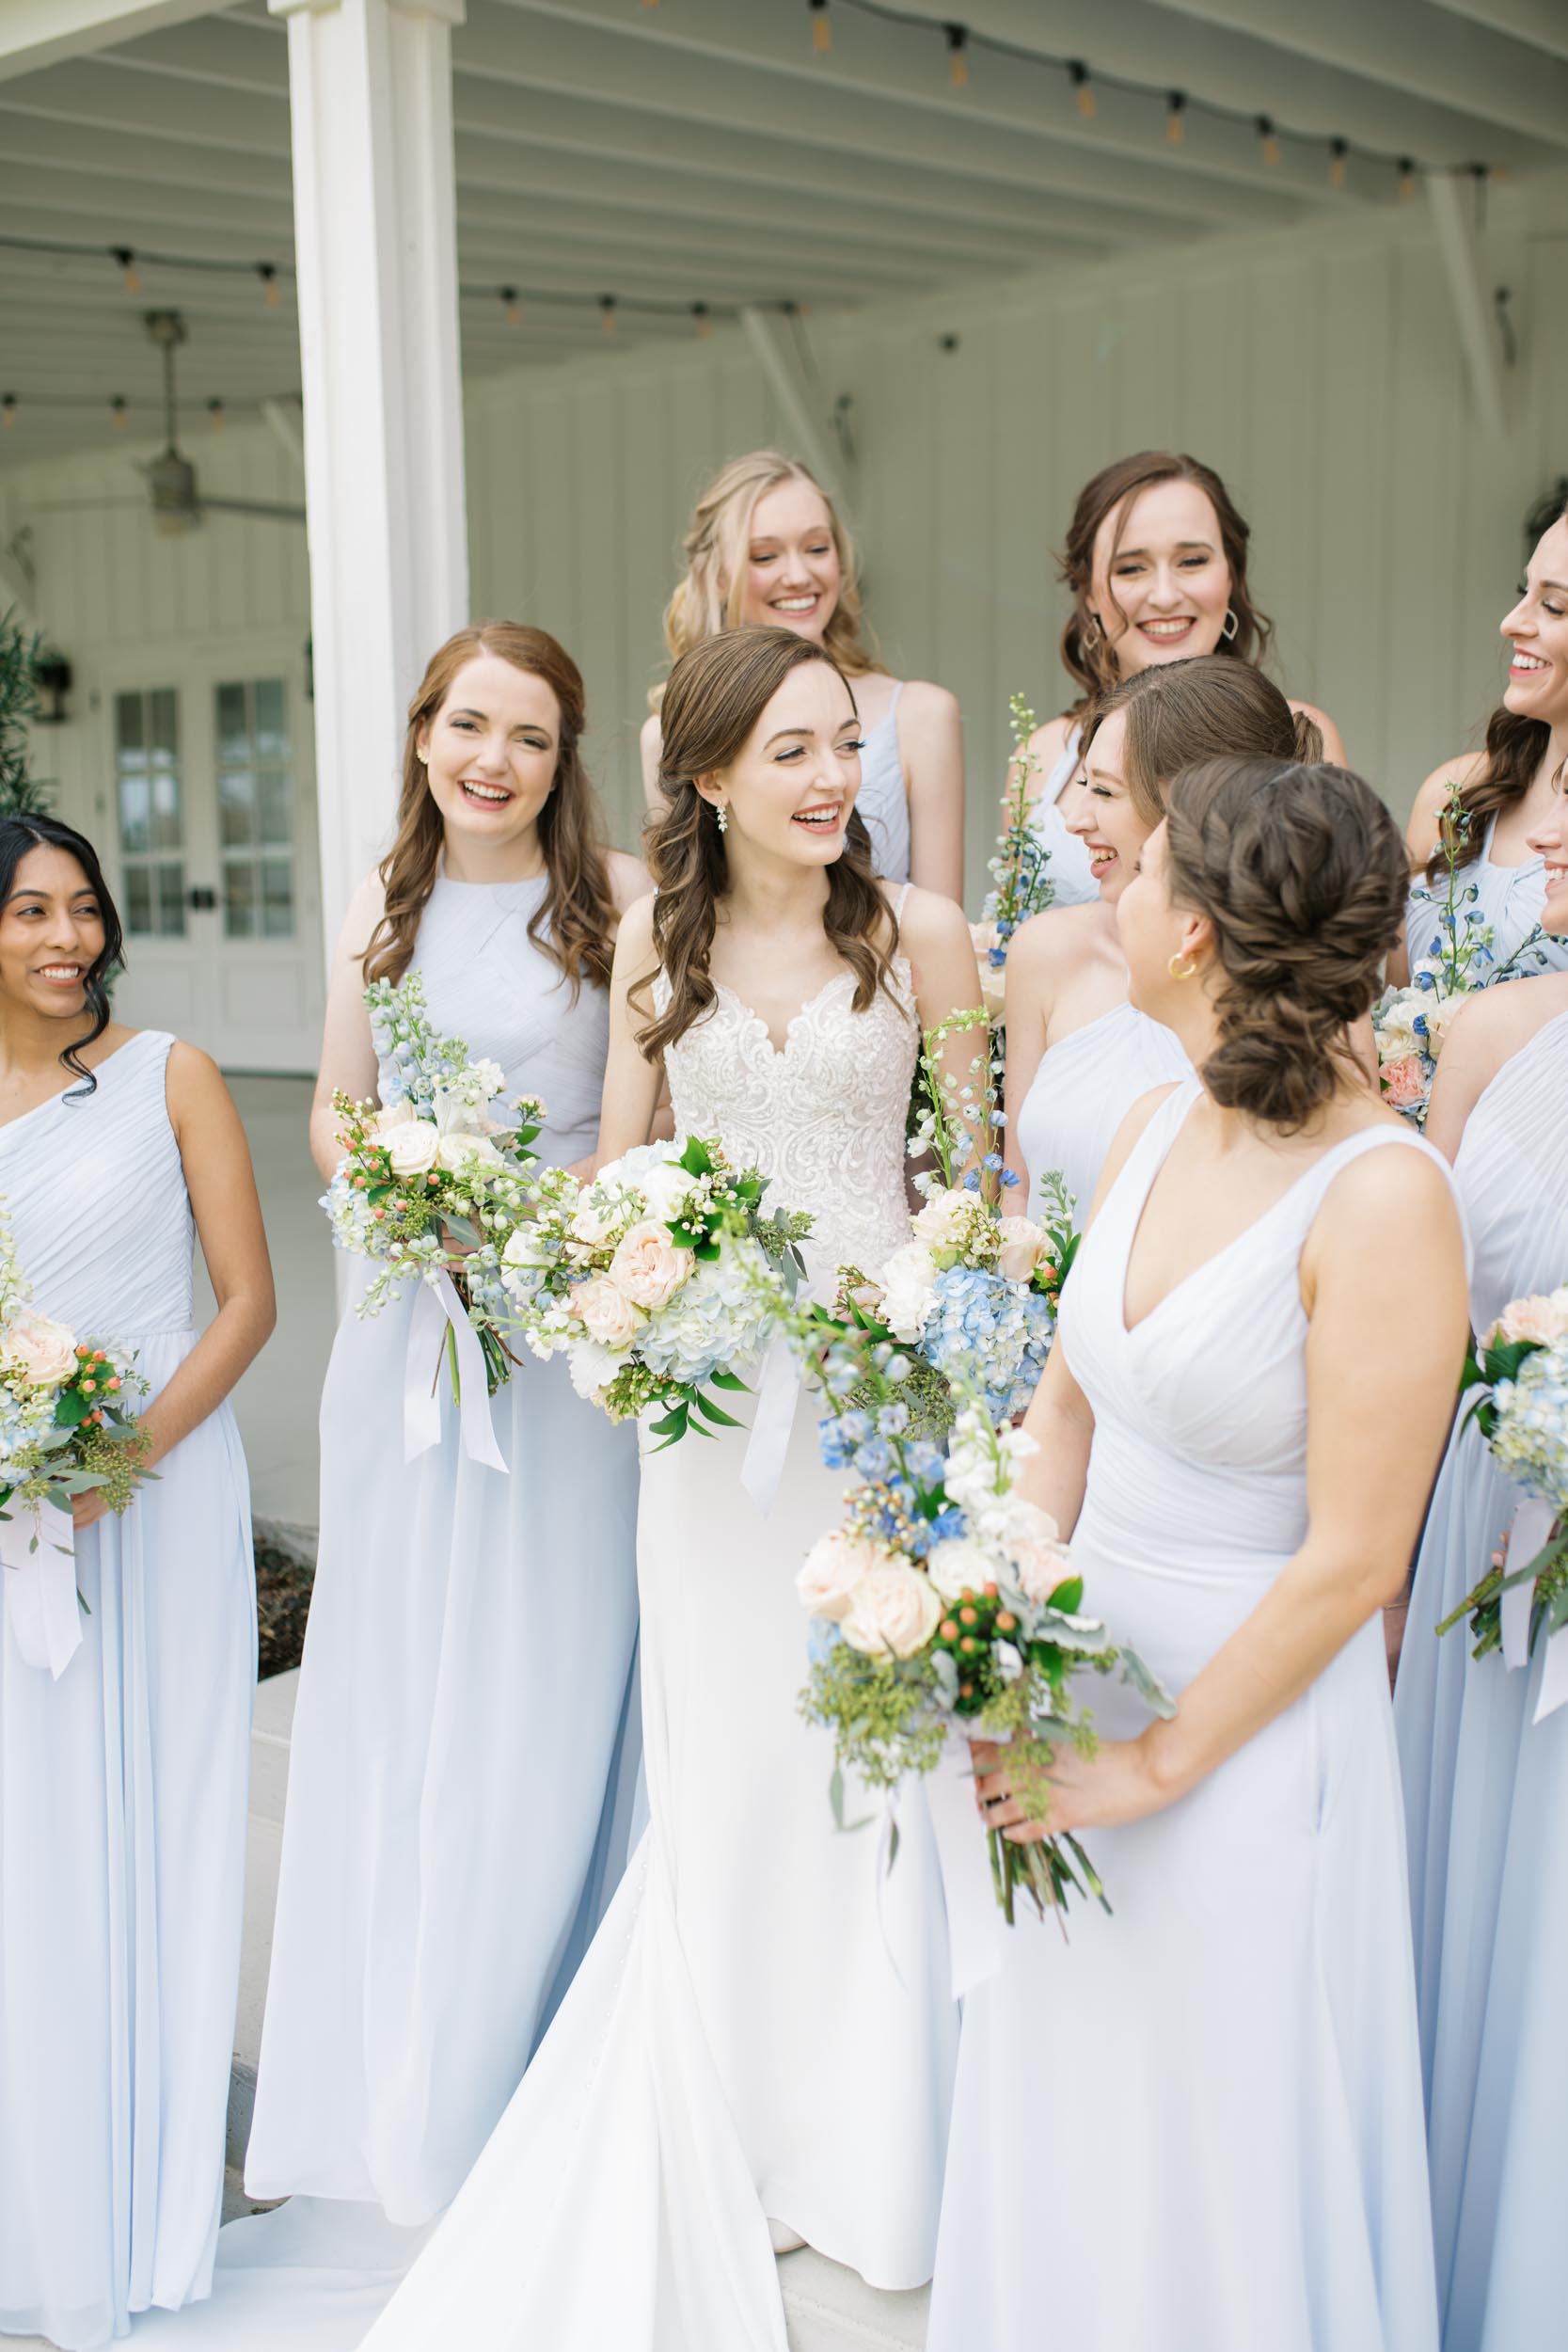 bride laughing alongside bridesmaids staggered wearing light blue dresses